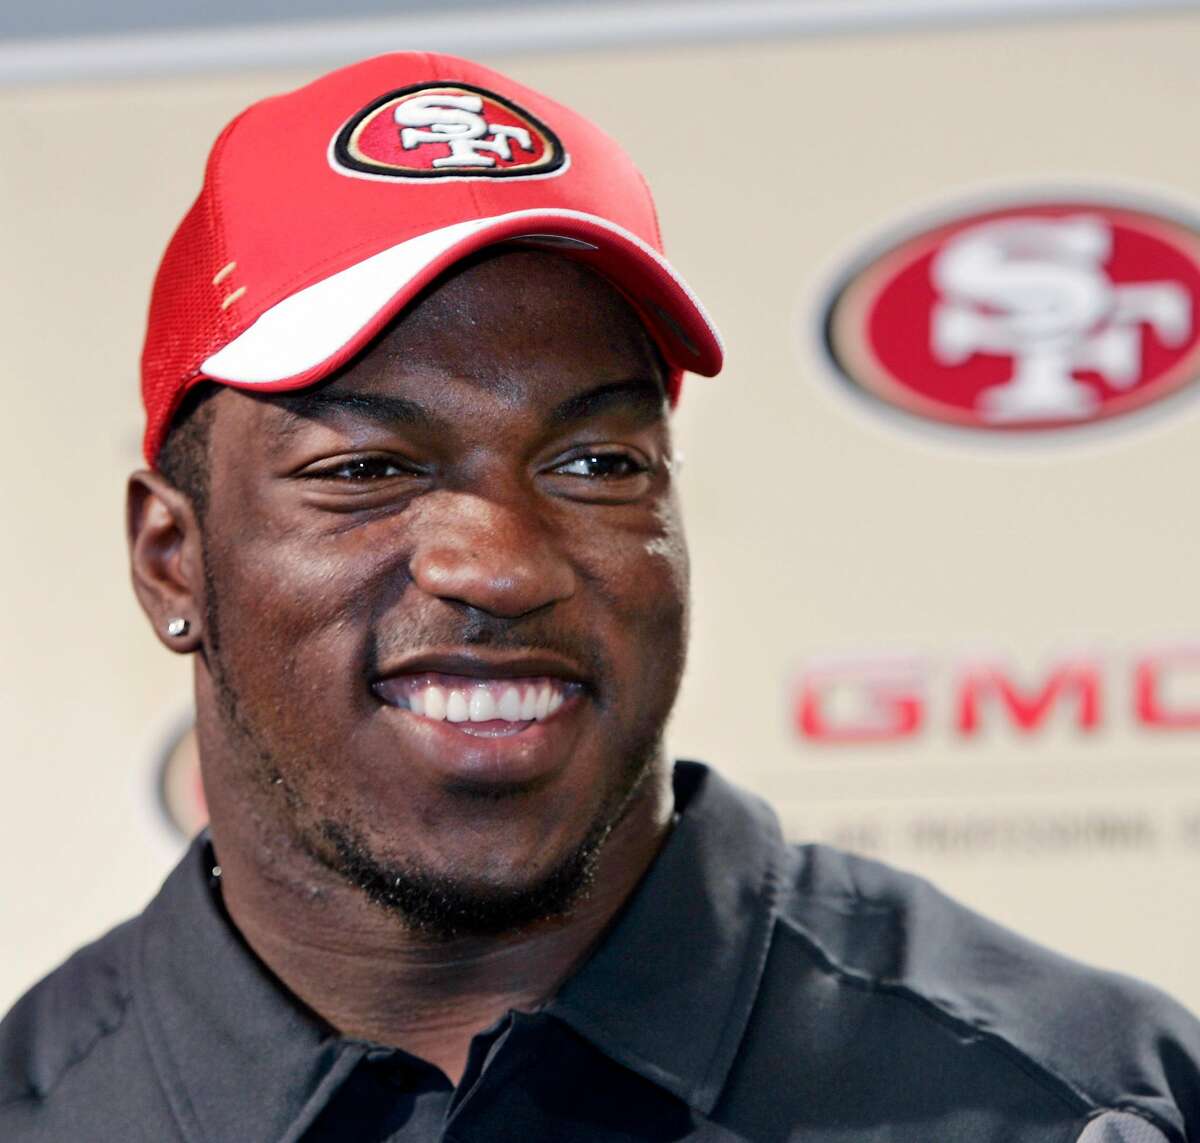 ** FILE ** San Francisco 49ers first round NFL football draft pick Patrick Willis smiles during a news conference at 49ers headquarters in Santa Clara, Calif., in this April 29, 2007 file photo. Willis won The Associated Press 2007 NFL Defensive Rookie of the Year award Friday Jan. 4, 2008. (AP Photo/Paul Sakuma)